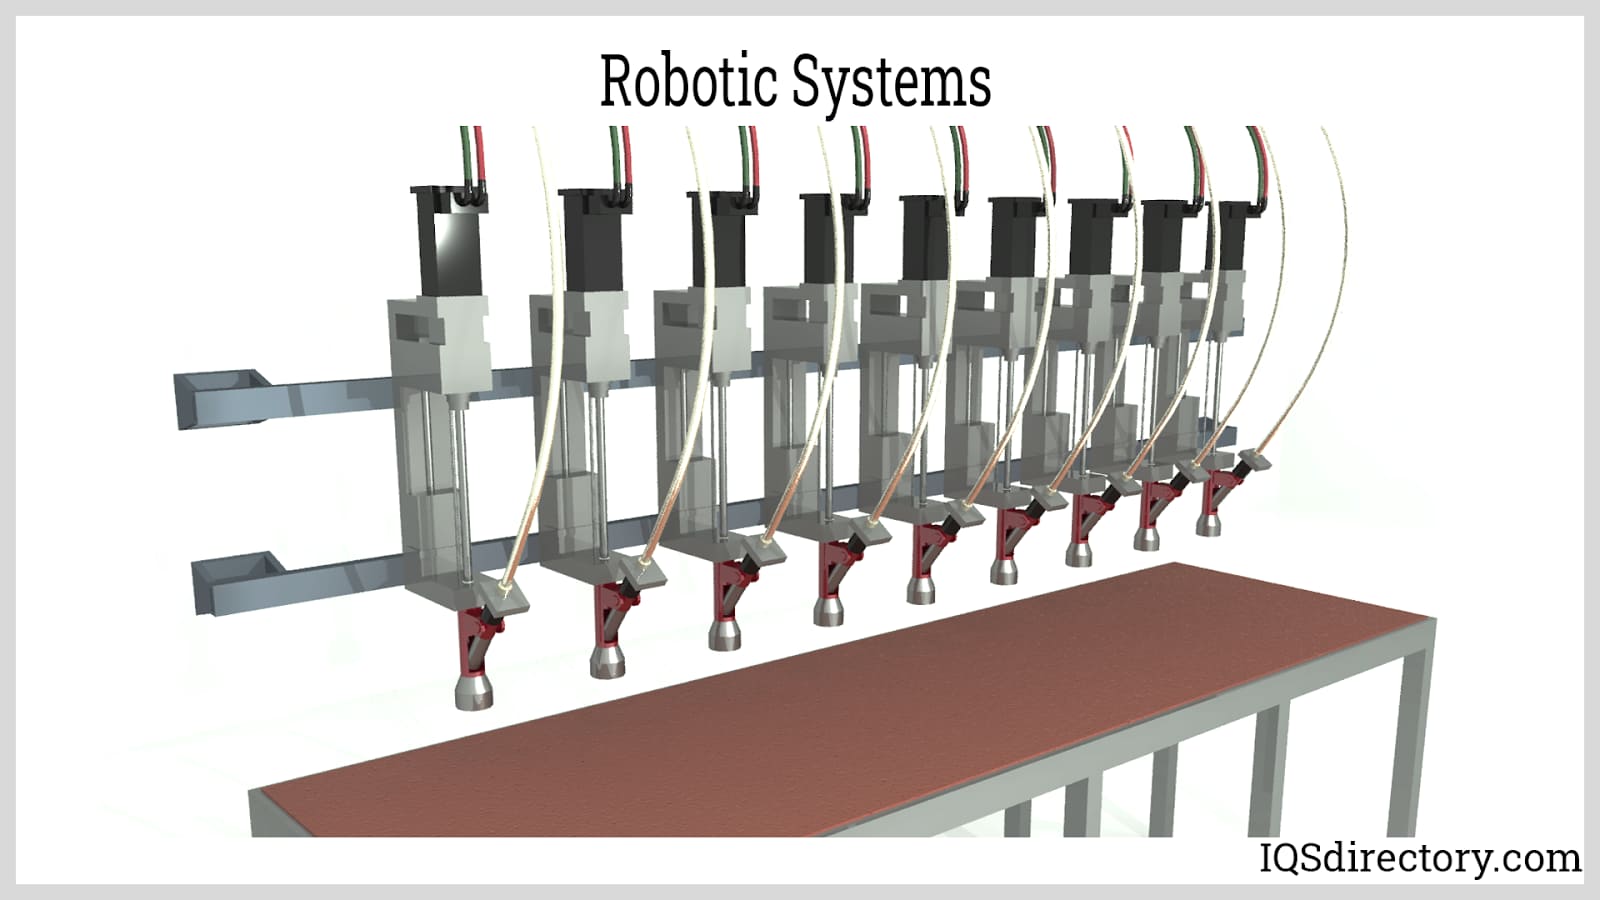 Robotic Systems